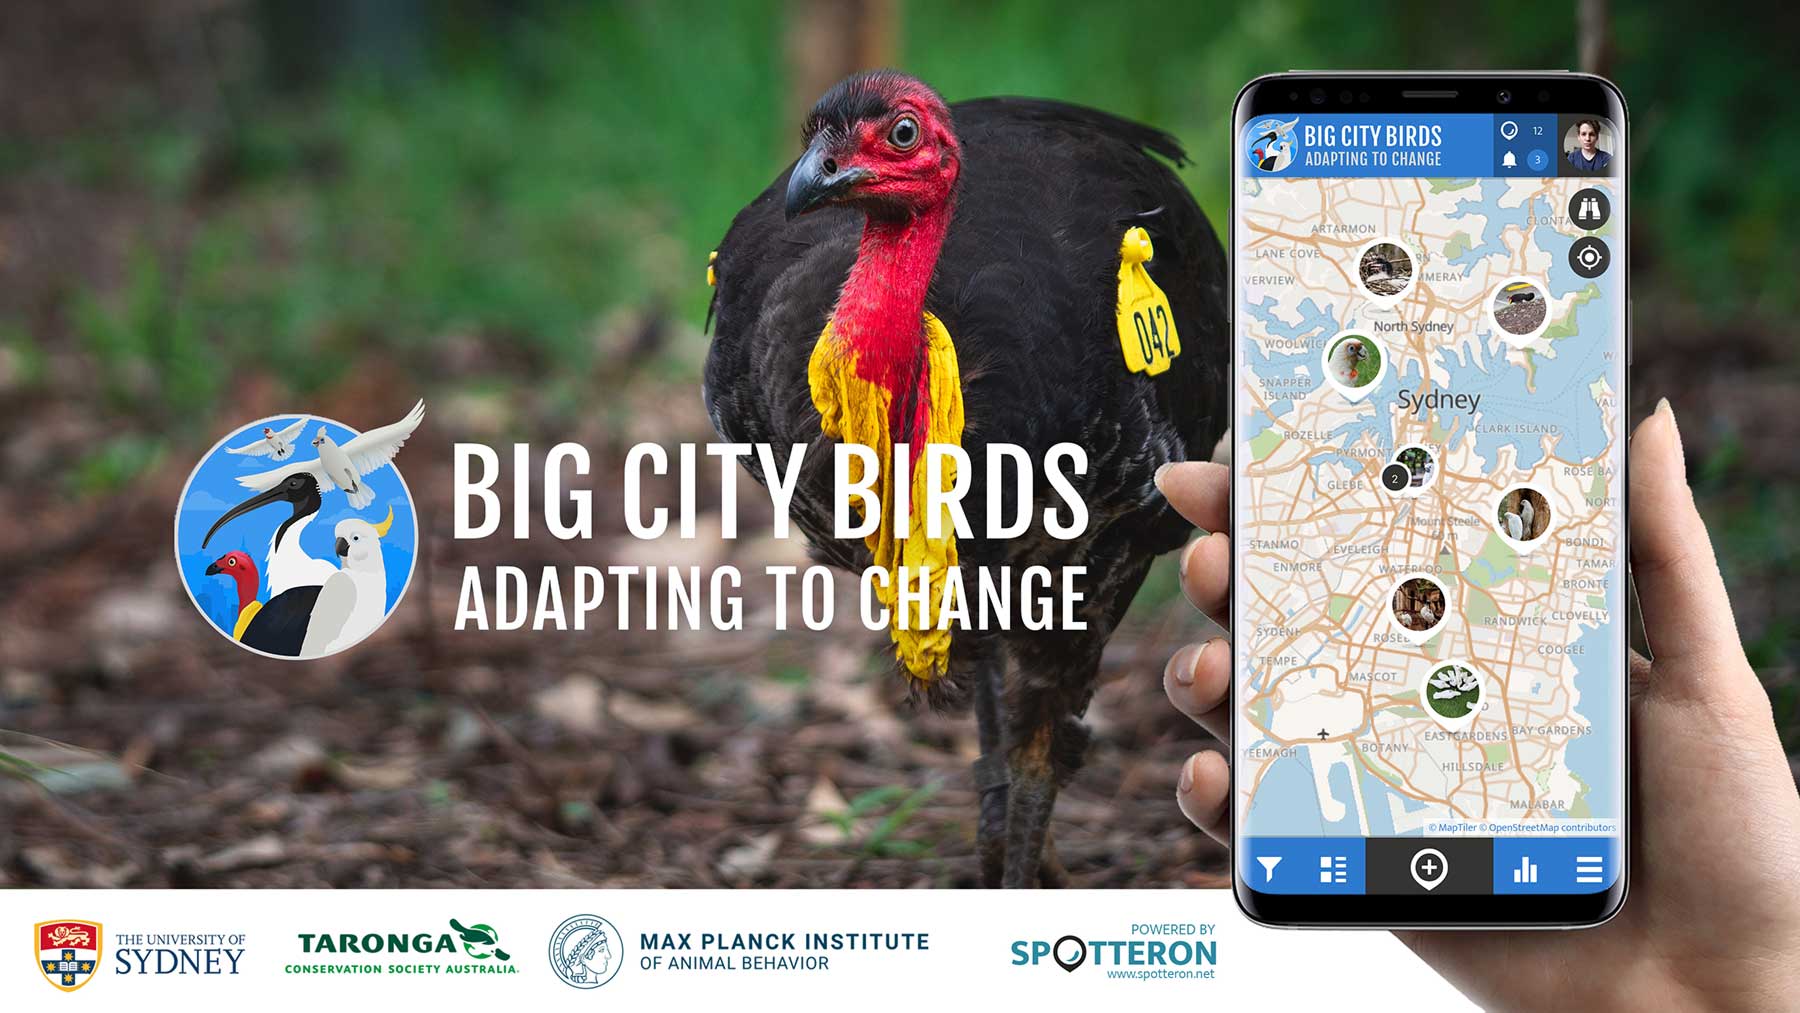 Get involved as a citizen scientist by reporting using the Big City Birds app.